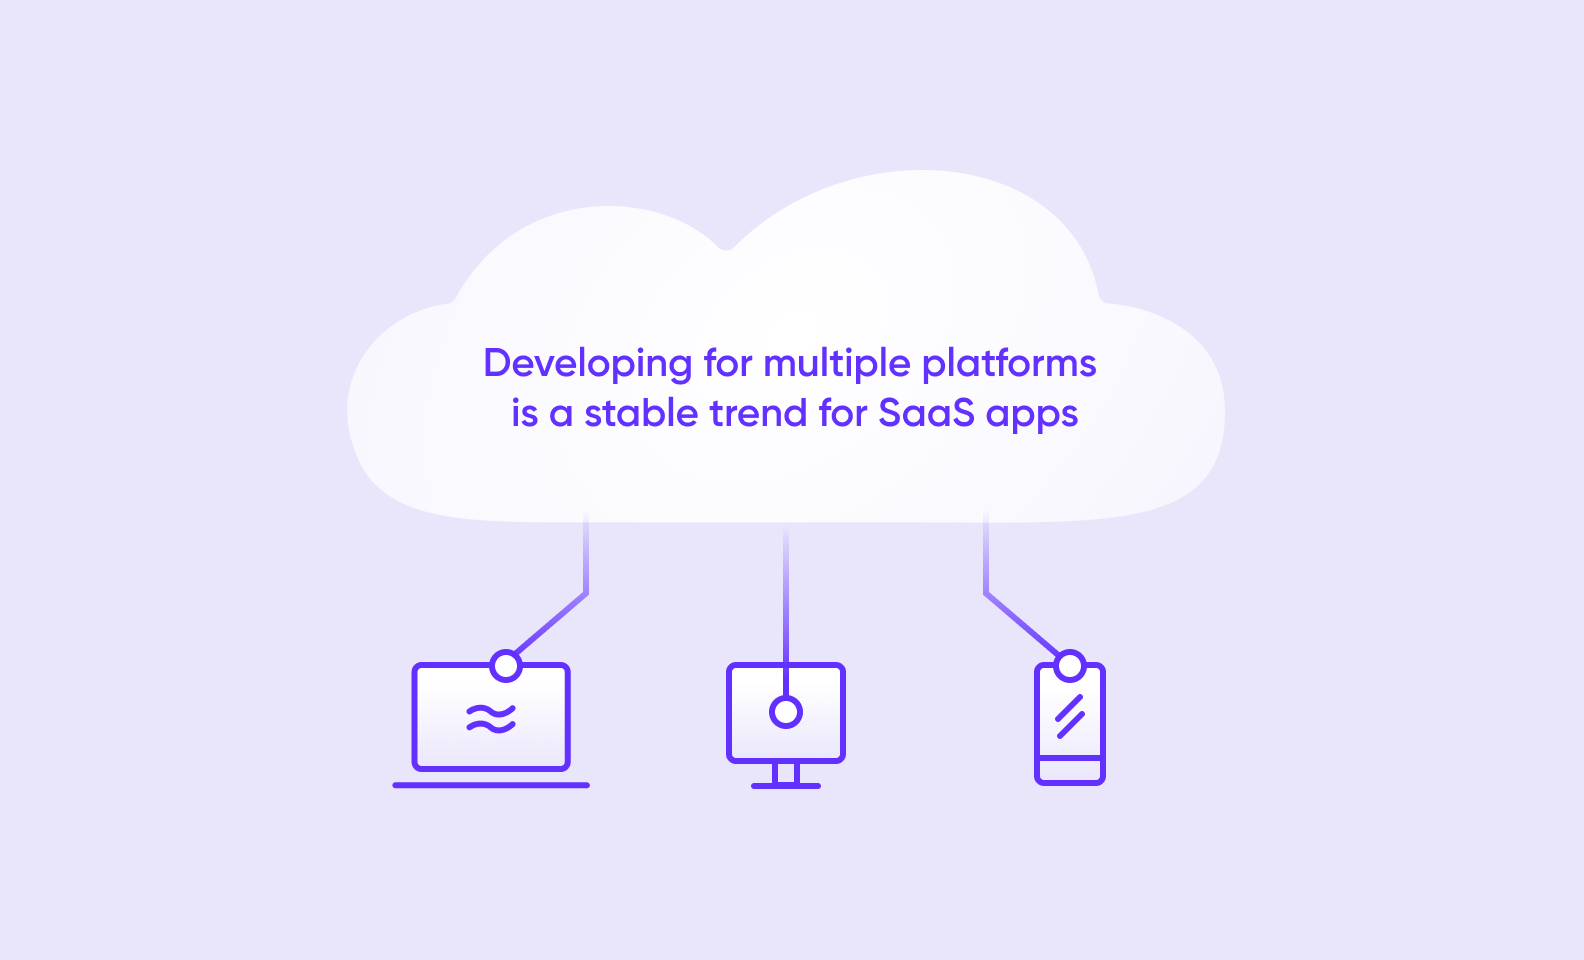 Developing for multiple platforms is a stable trend for SaaS apps